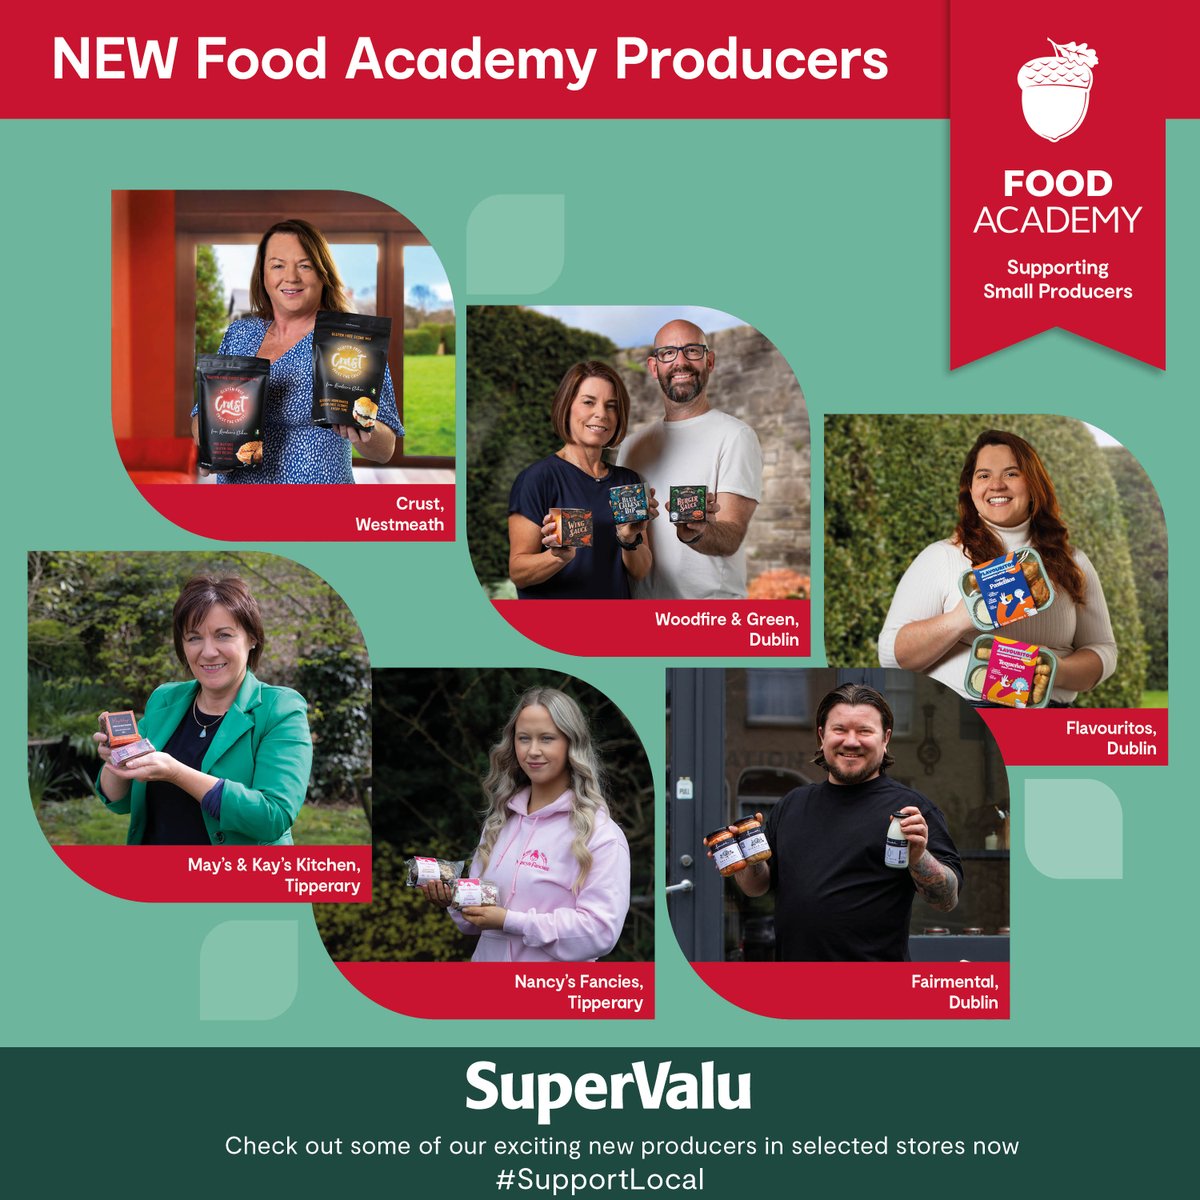 🌟 Exciting news alert! 🎉 We're thrilled to introduce 21 new Food Academy Producers in selected SuperValu stores nationwide! 🛒 Get ready to tantalize your taste buds with their culinary creations – check out your local SuperValu now! 💫#FoodAcademy #SupportLocal #TasteofLocal